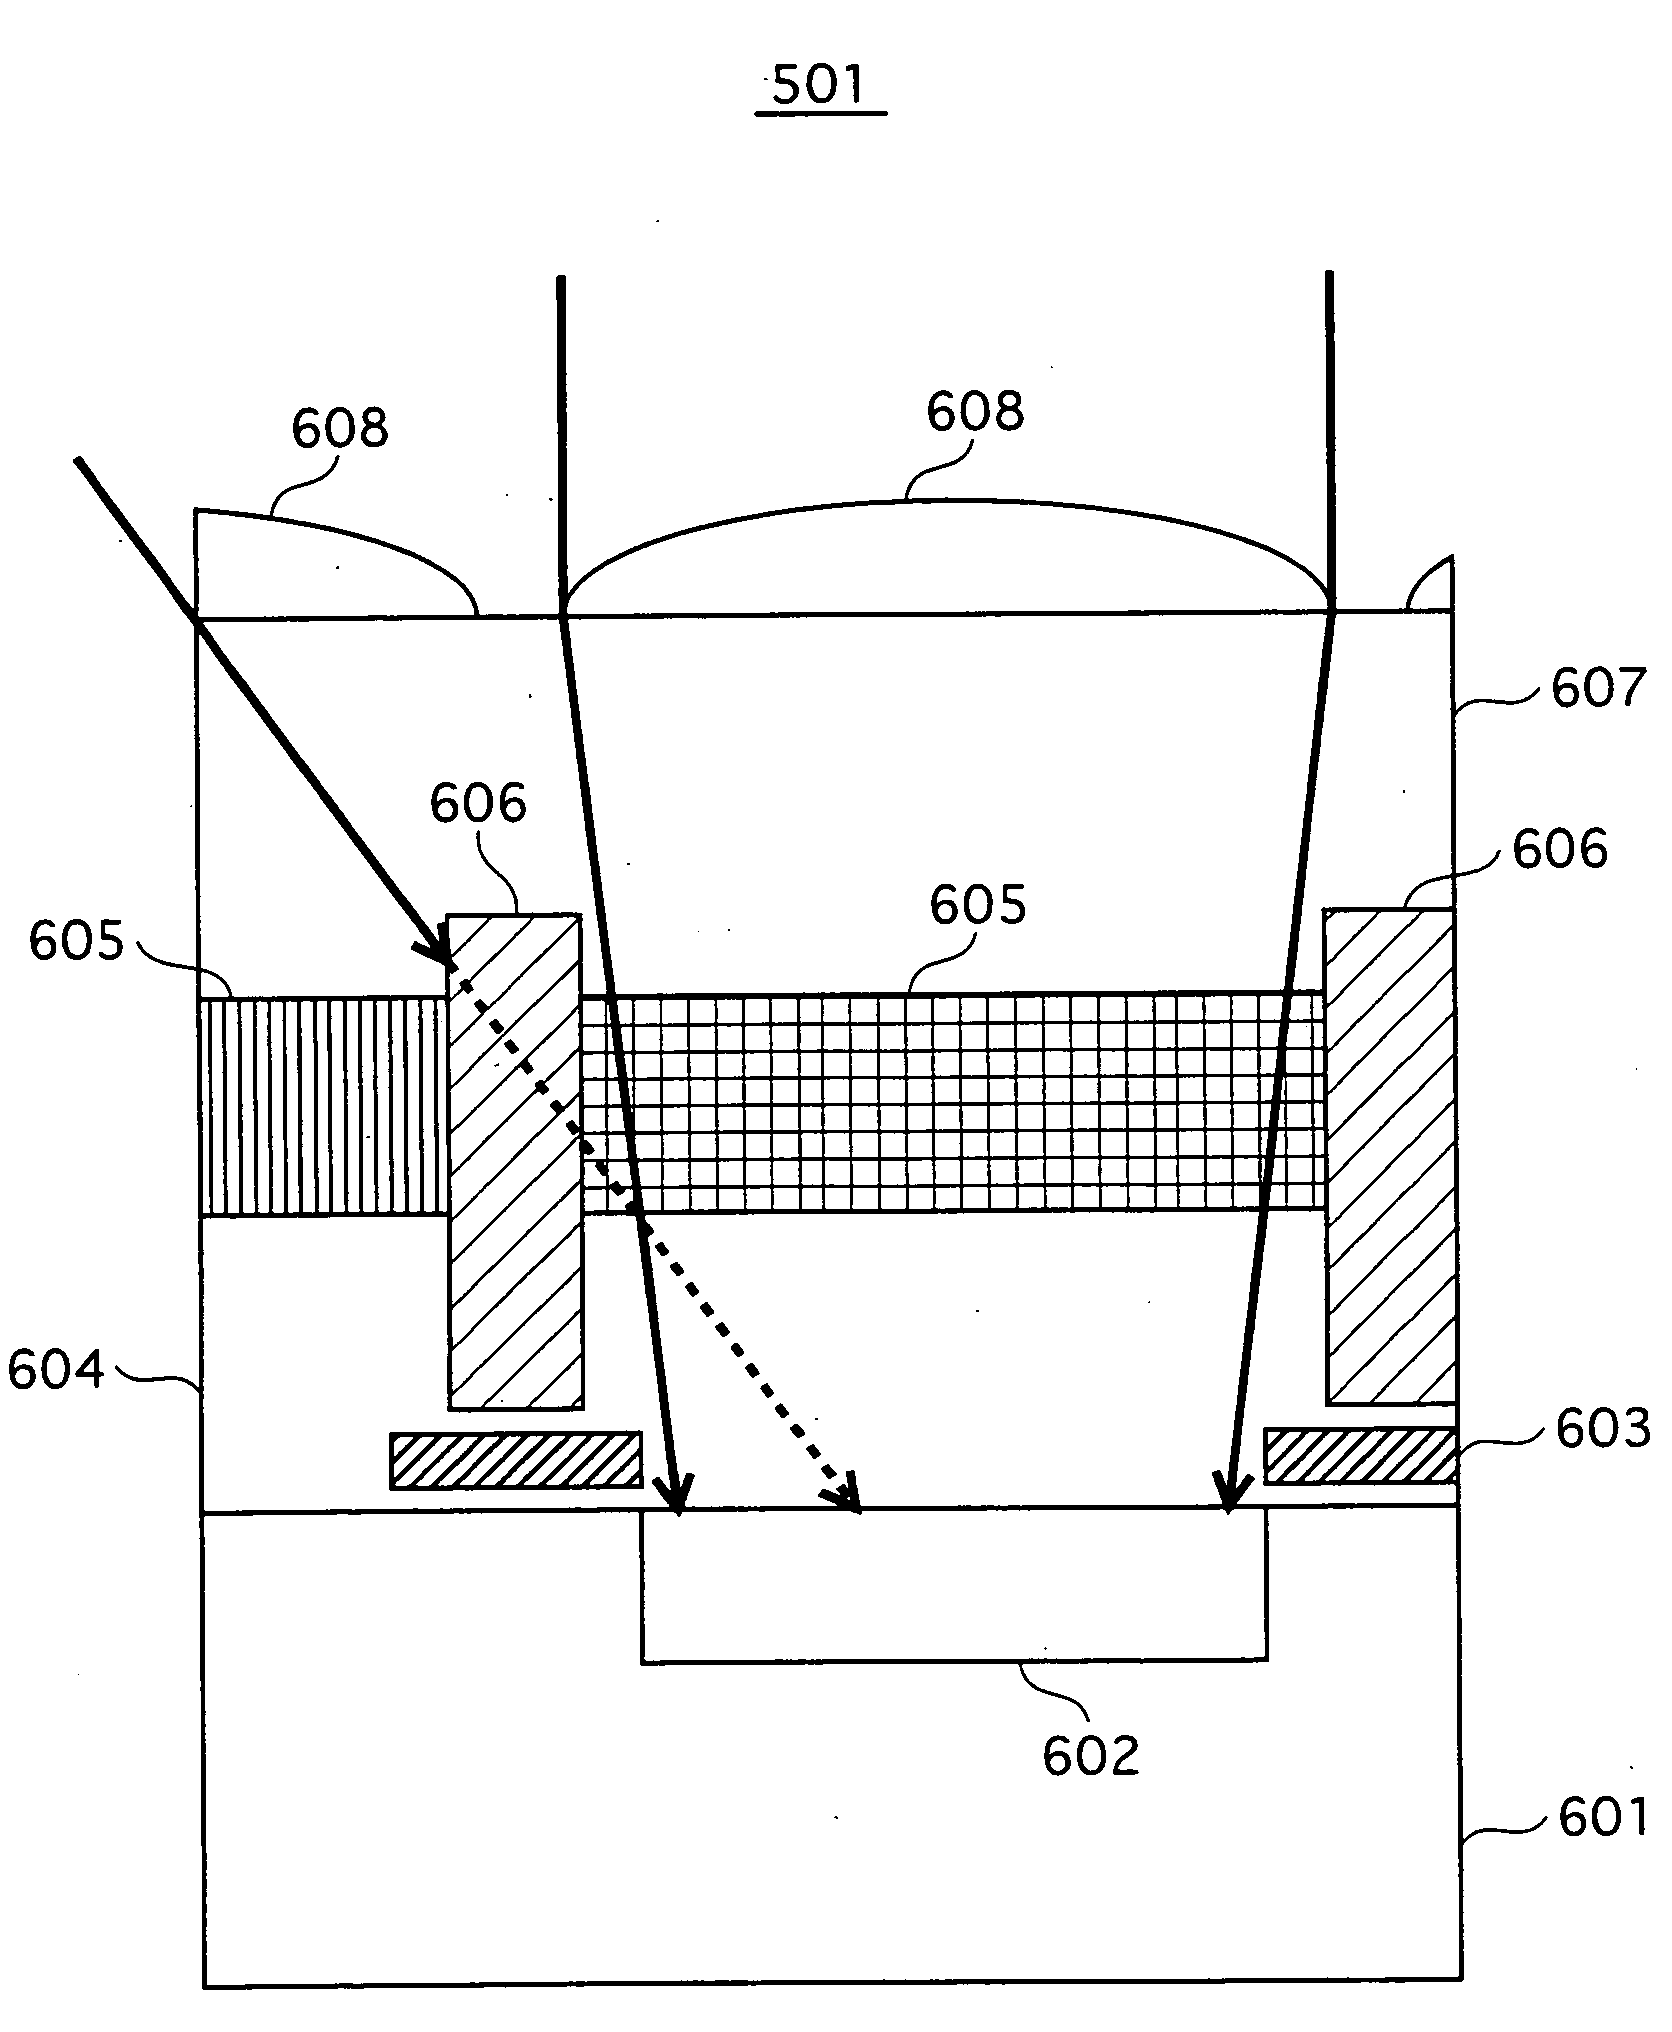 Solid-state imaging device and camera